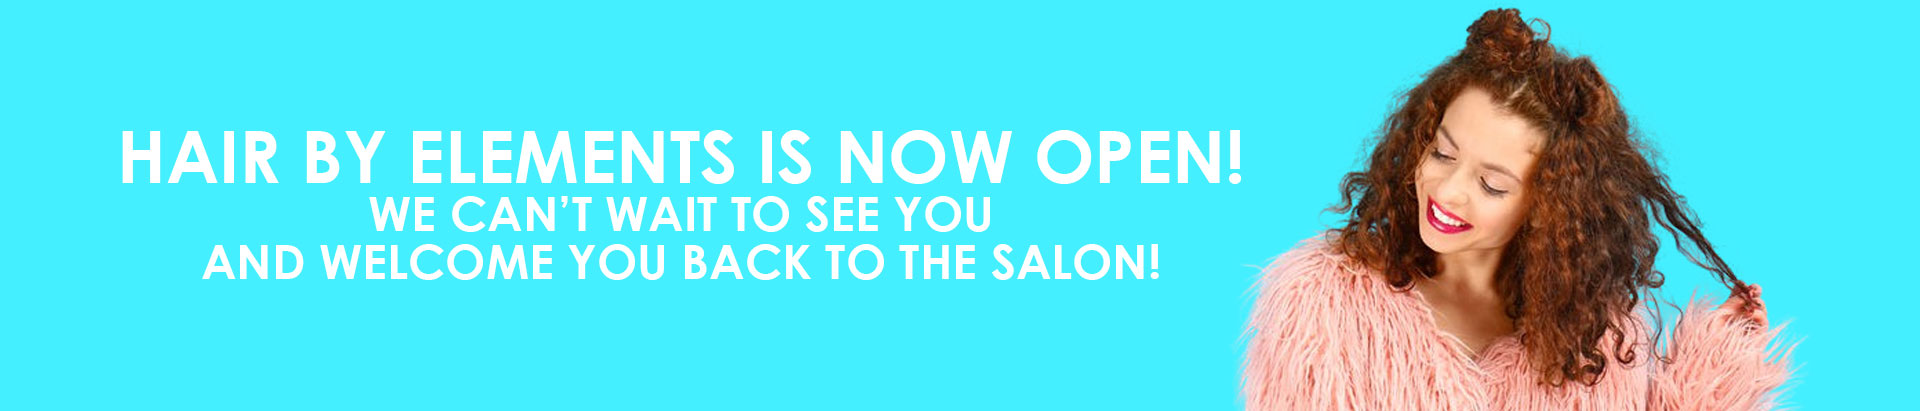 Hair by Elements is now open We can’t wait to see you and welcome you back to the salon